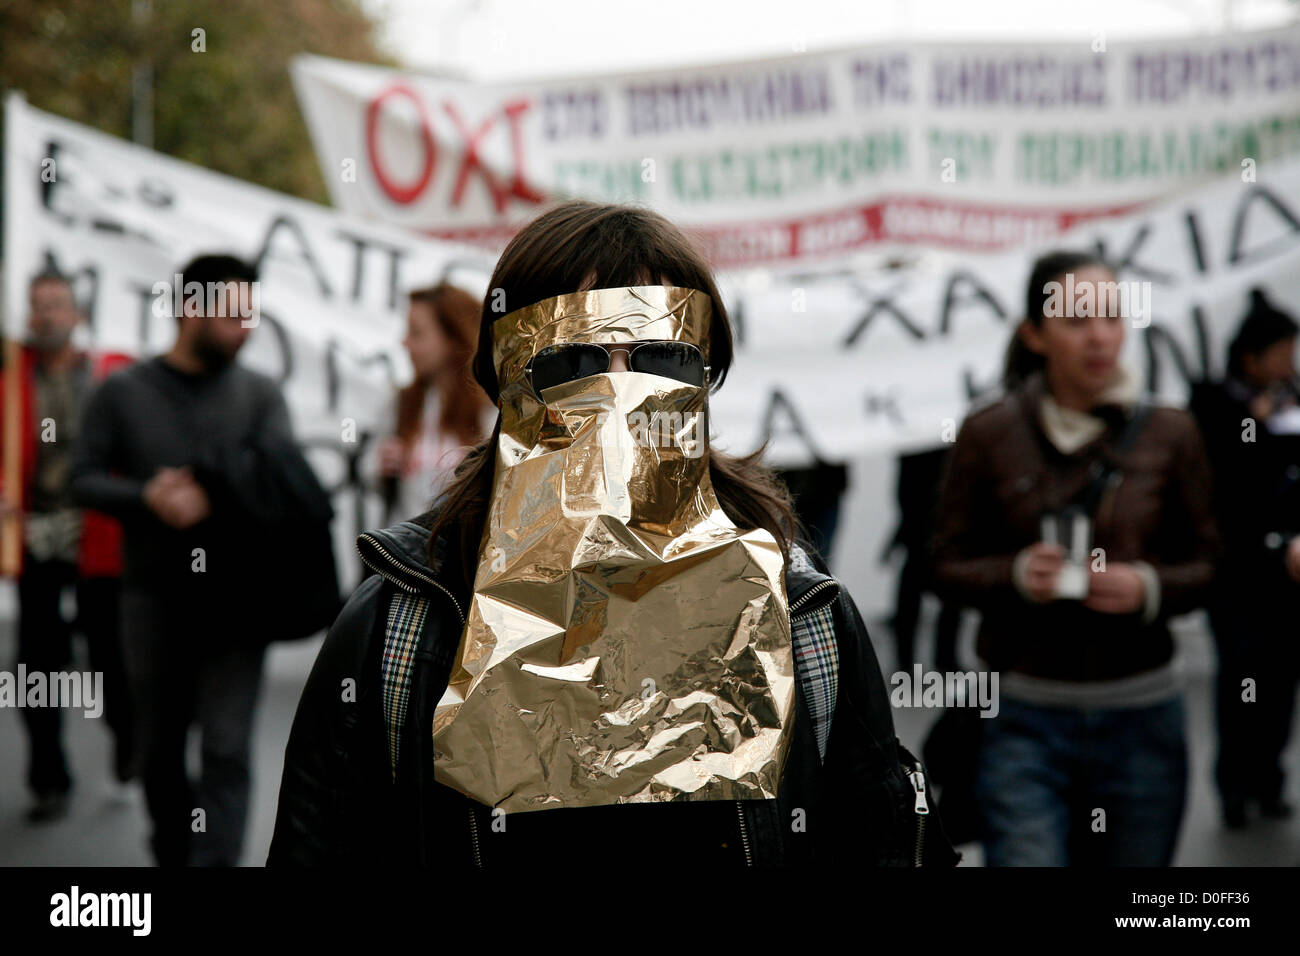 Thessaloniki,Greece. November 24, 2012. Demonstrator wearing a improvised mask of gold wrapping paper. Thousands of people flooded the streets of Thessaloniki to protest against efforts by Hellas Gold, a subsidiary of the Canadian firm Eldorado Gold, to mine the Skouries quarry on Mount Kakkavos, in the Halkidiki peninsula and the city of Kilkis in northern Greece. Stock Photo